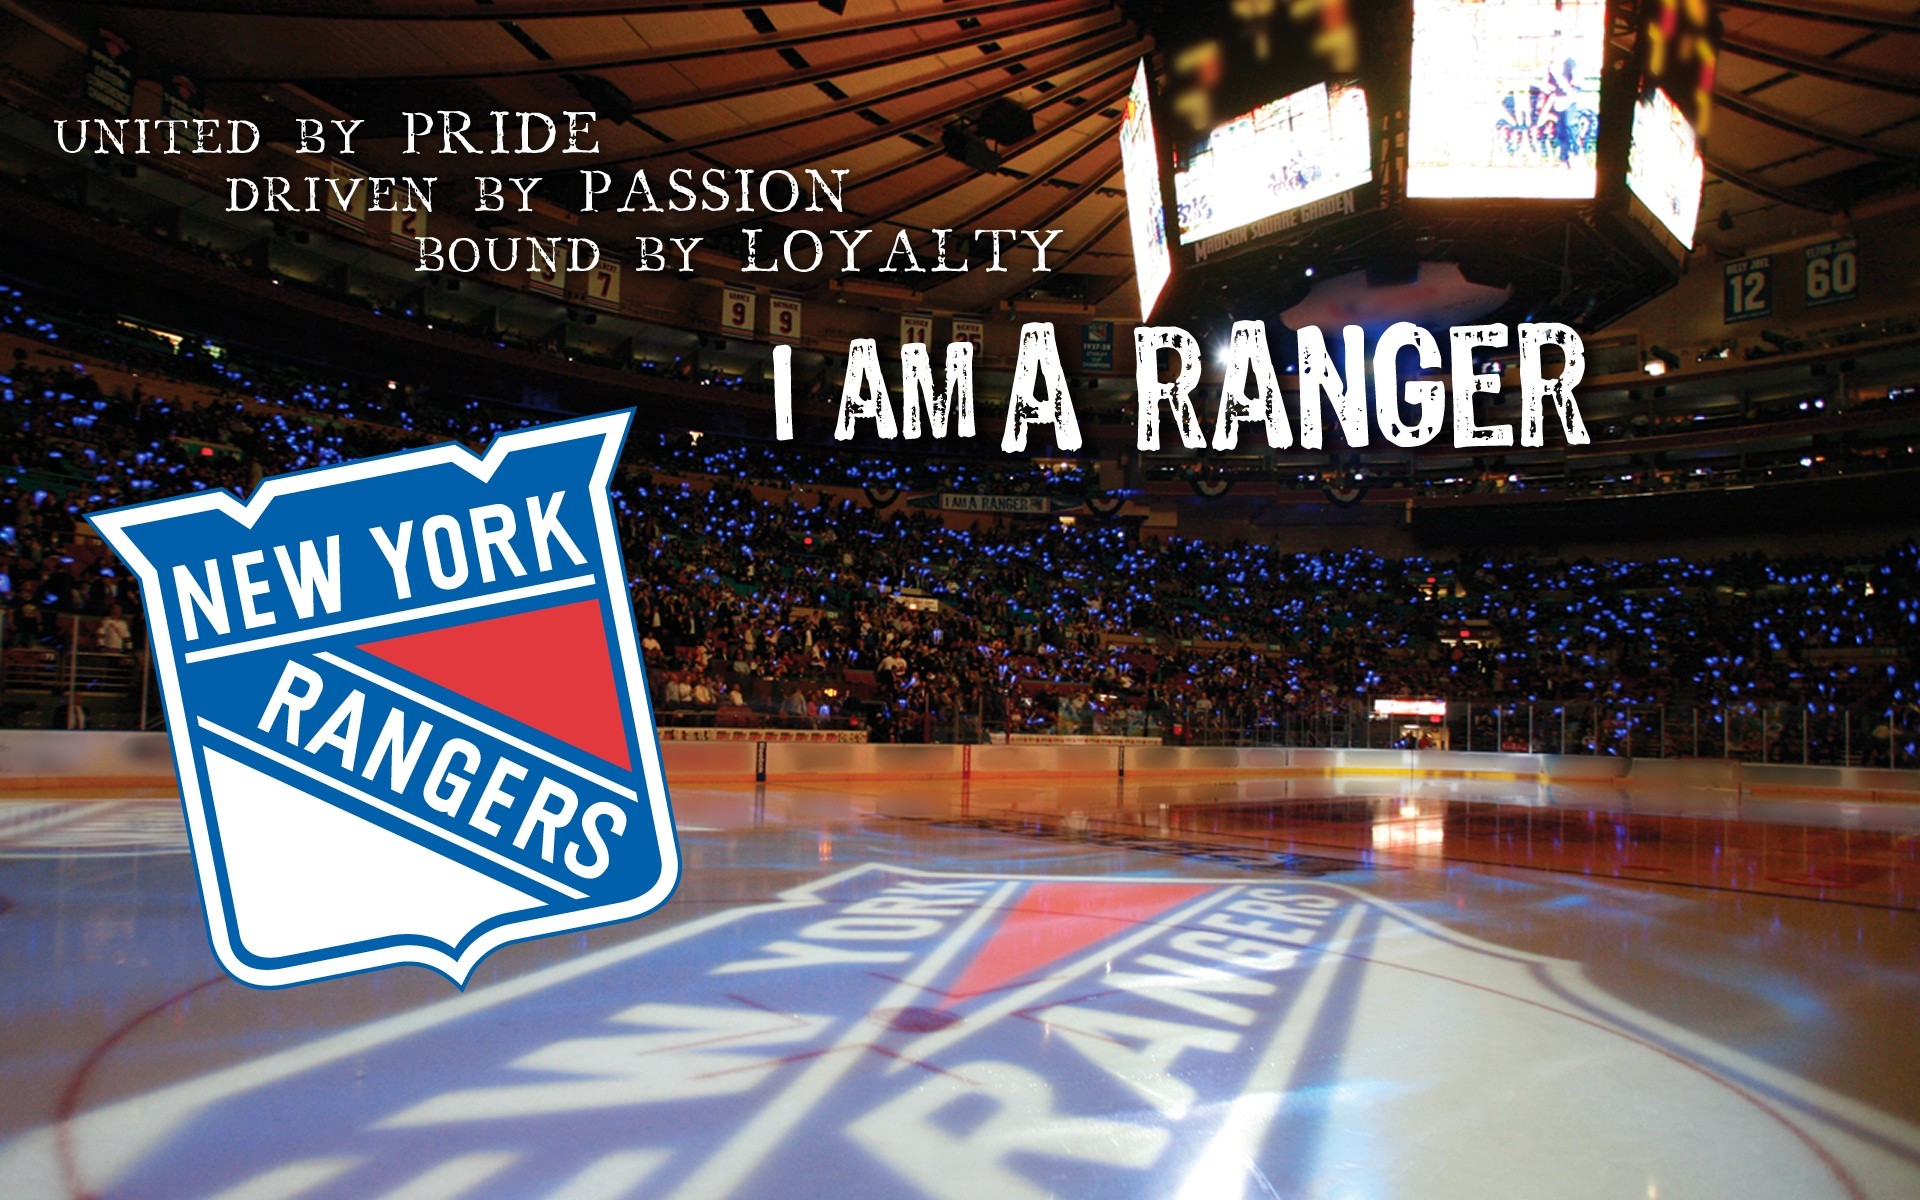 1920x1200 78 Best images about New York Rangers on Pinterest | Legends